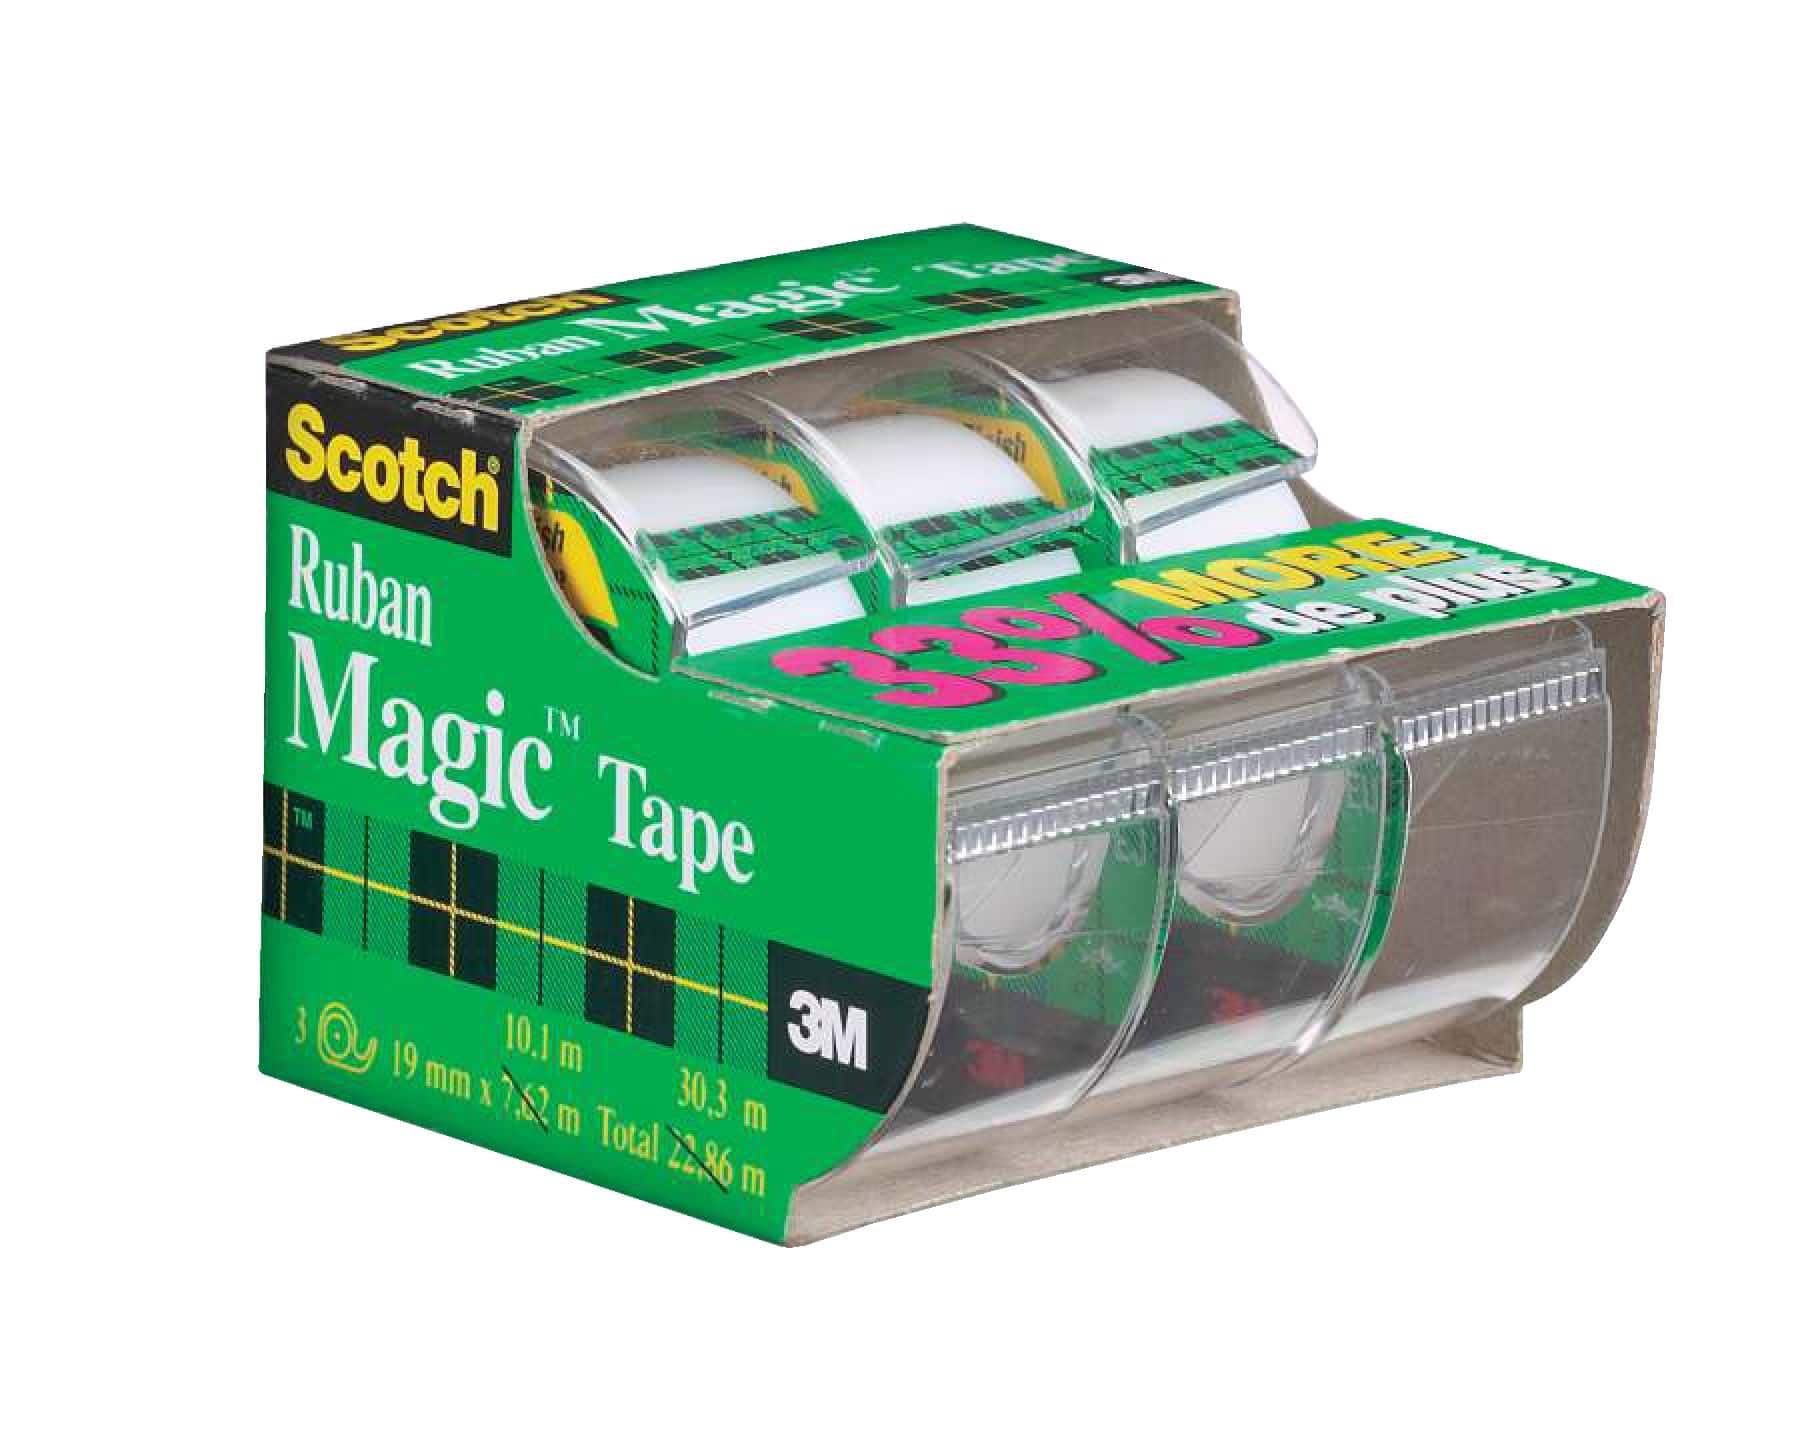 3M Scotch Removable Magic Tape with Dispenser 19mm x 33m